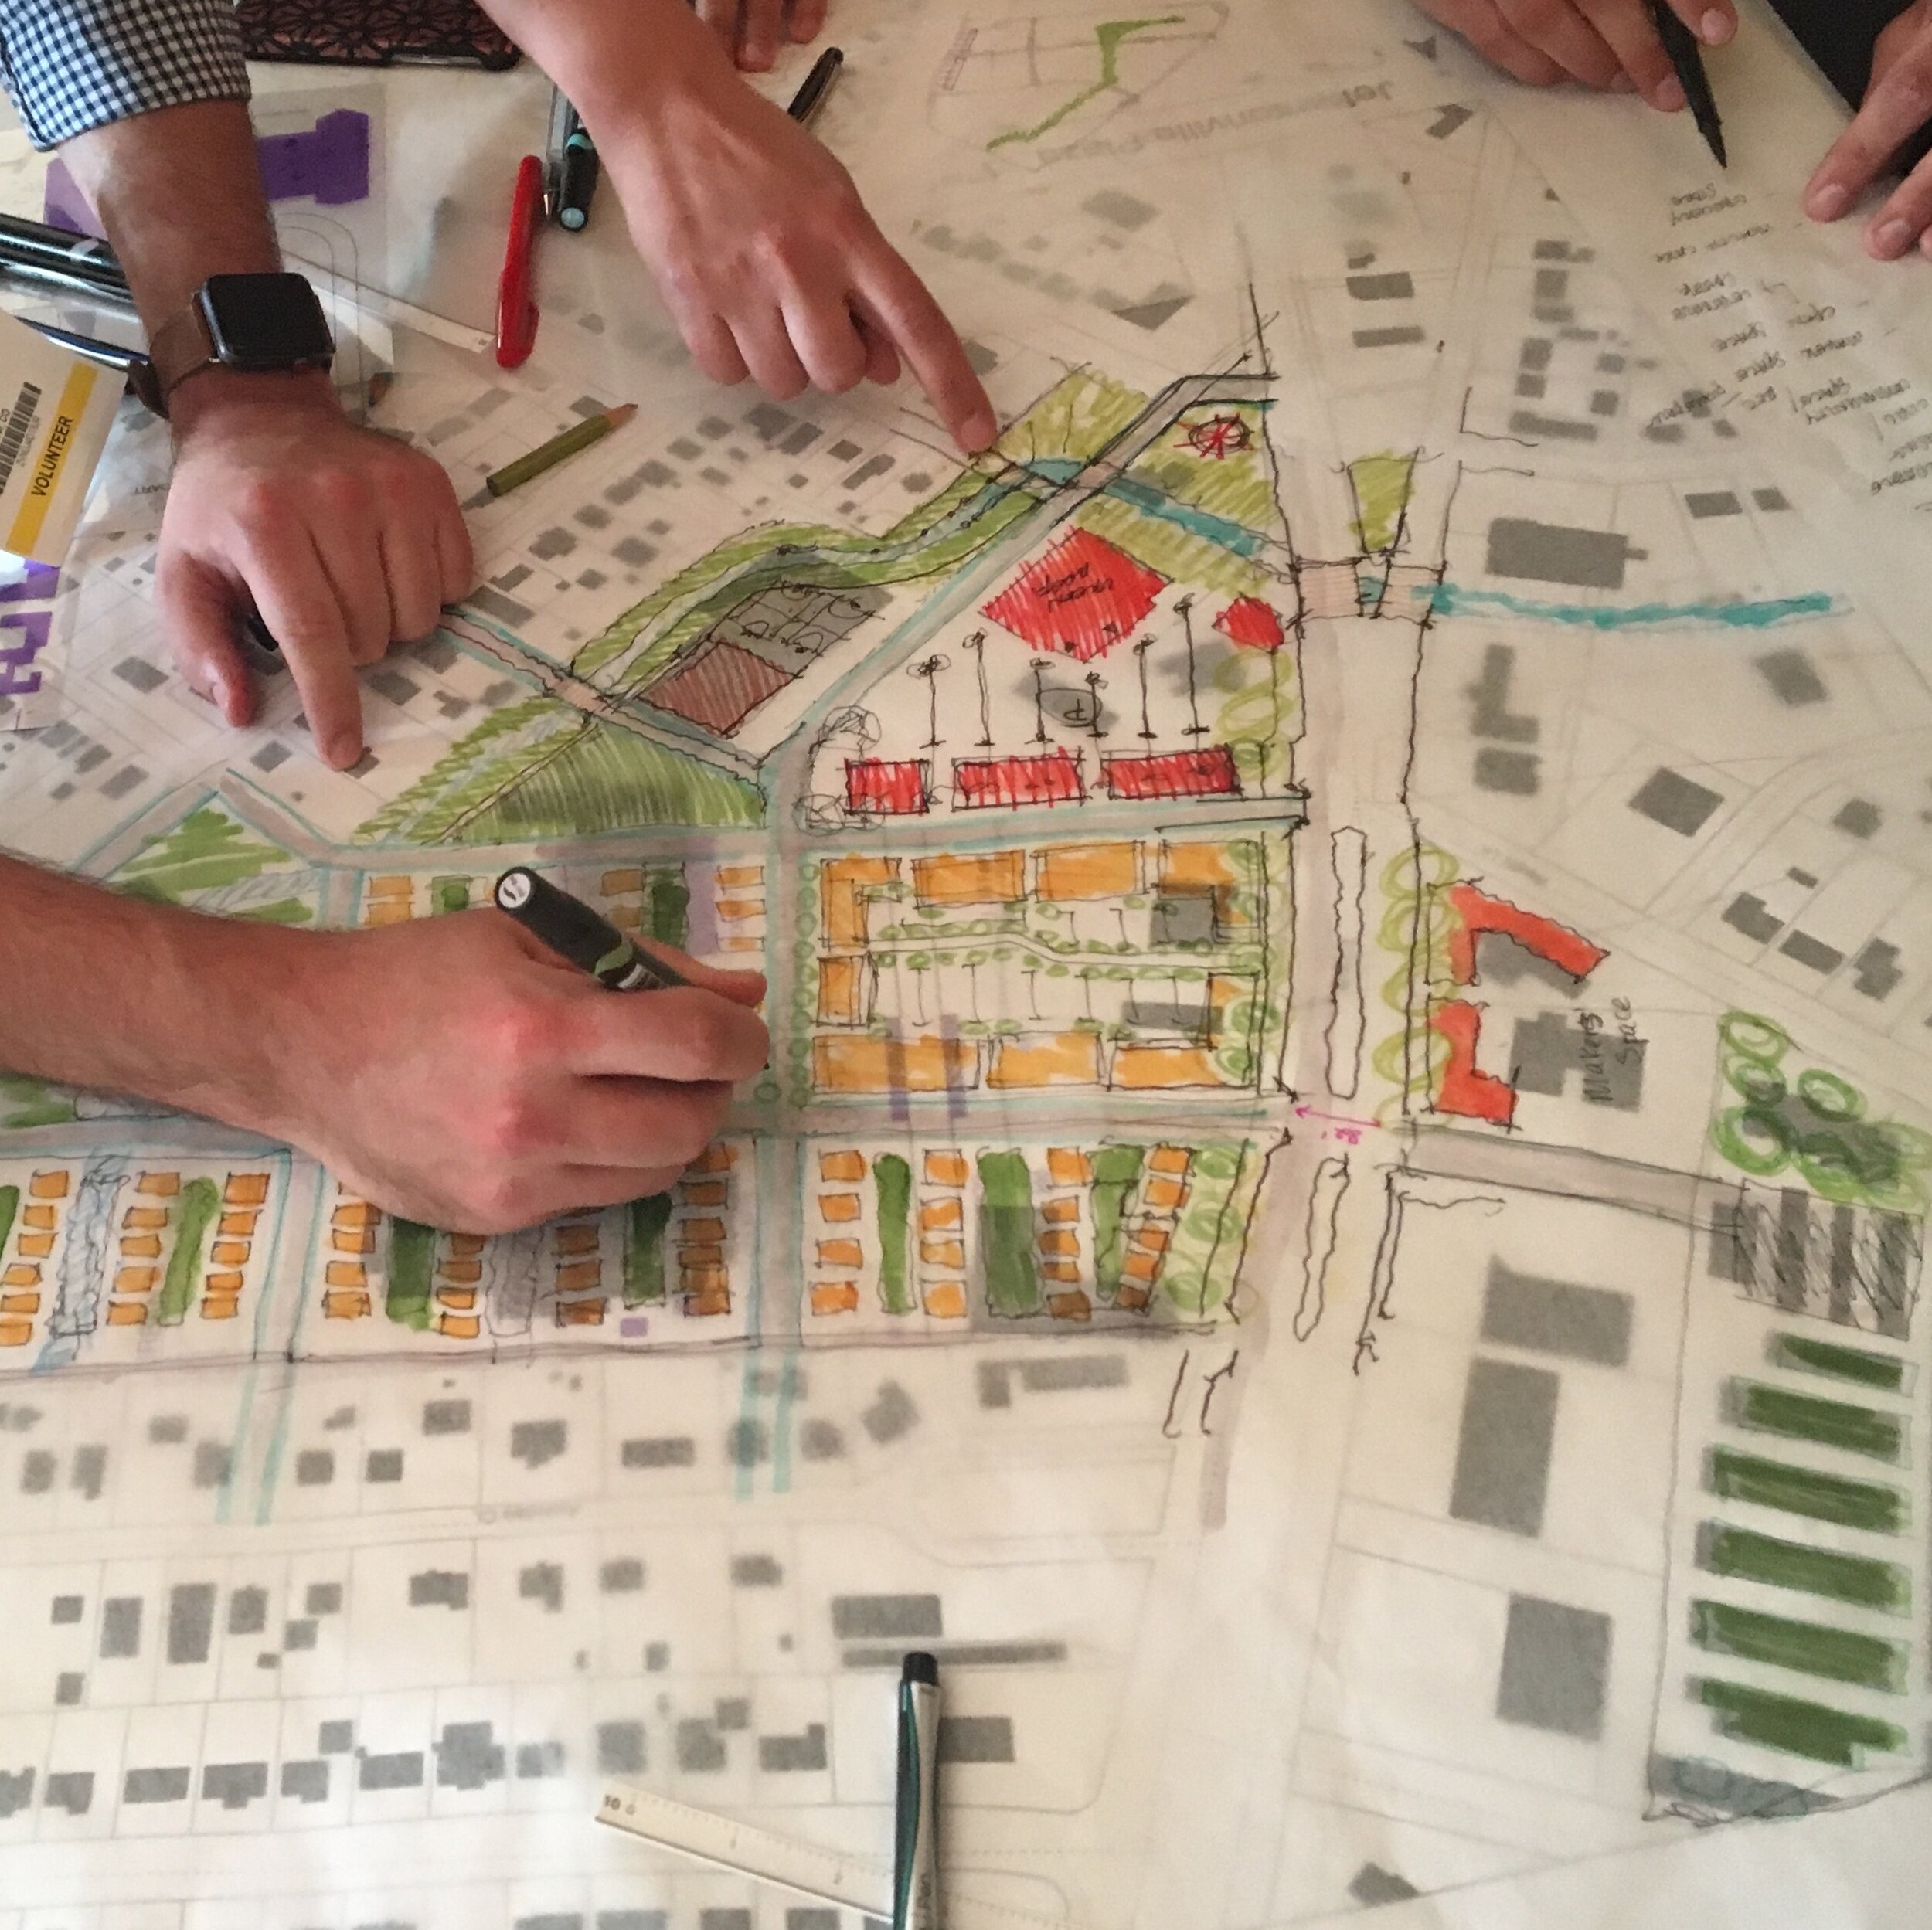 Participants sketching in a retrofitting suburbia workshop. June and Ellen regularly offer workshops for designers, urban planners, and students.